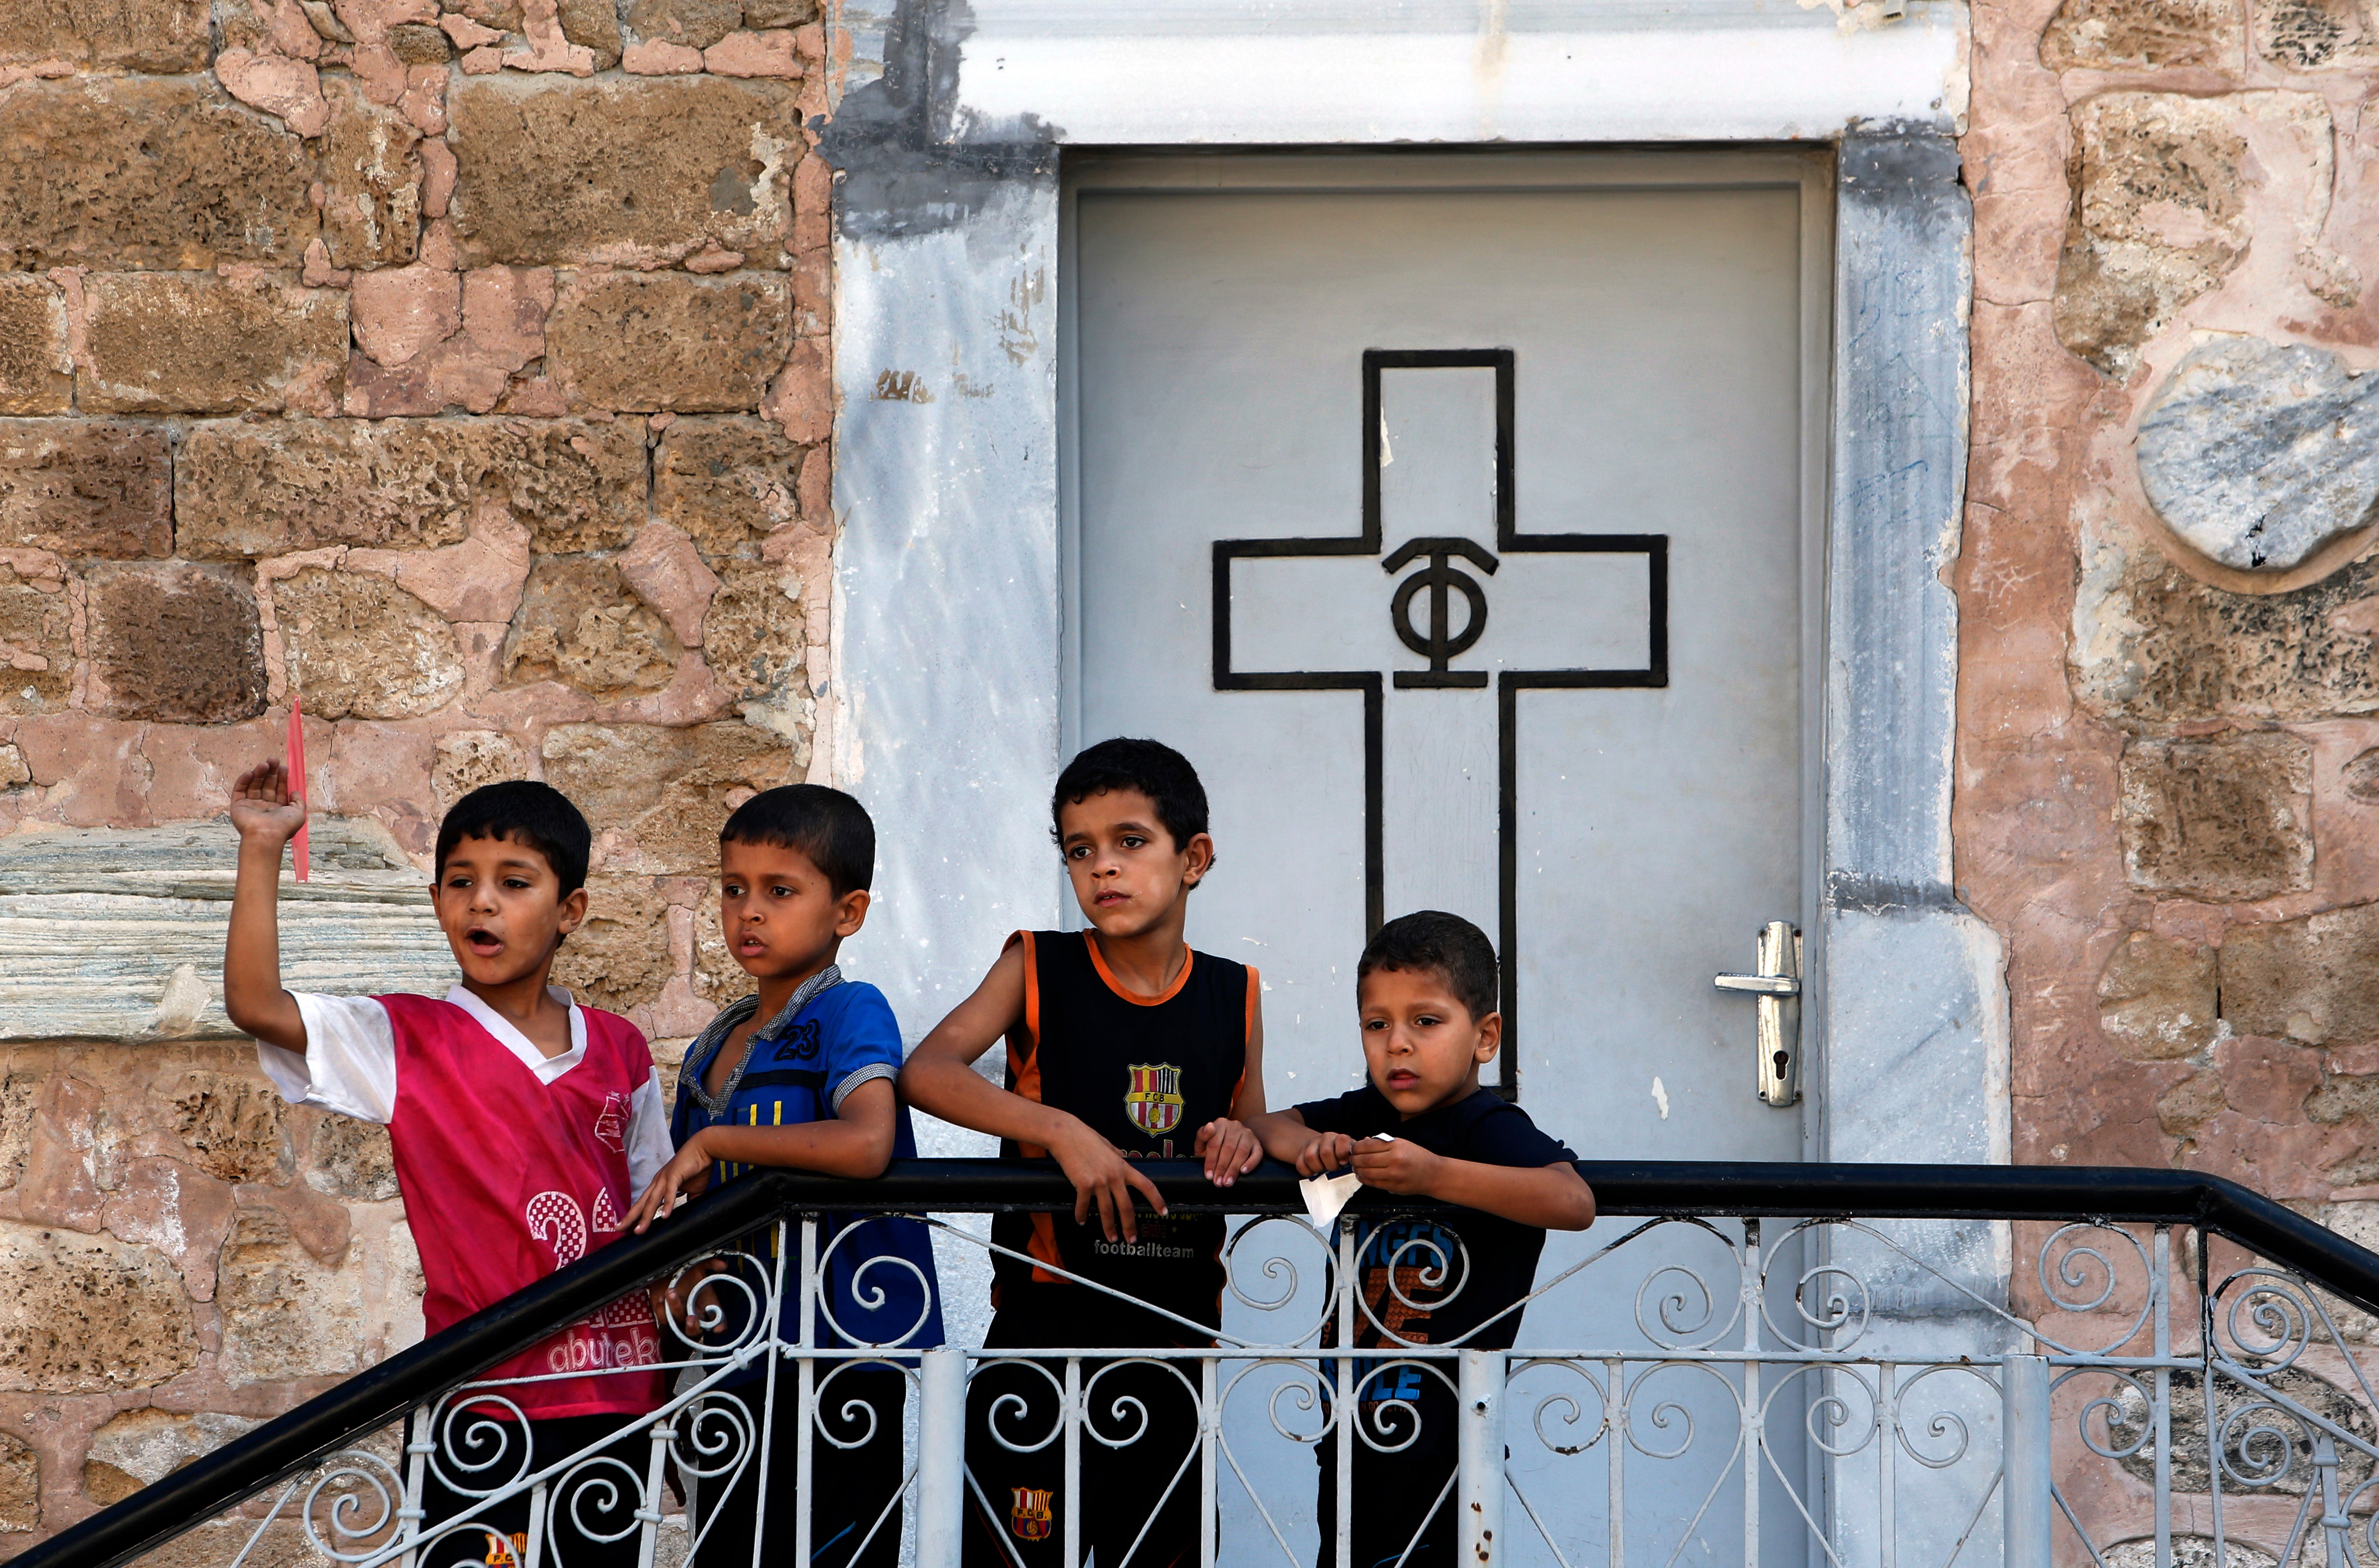 Palestinian Christians in the Gaza Strip celebrate Easter amid COVID-19 outbreak